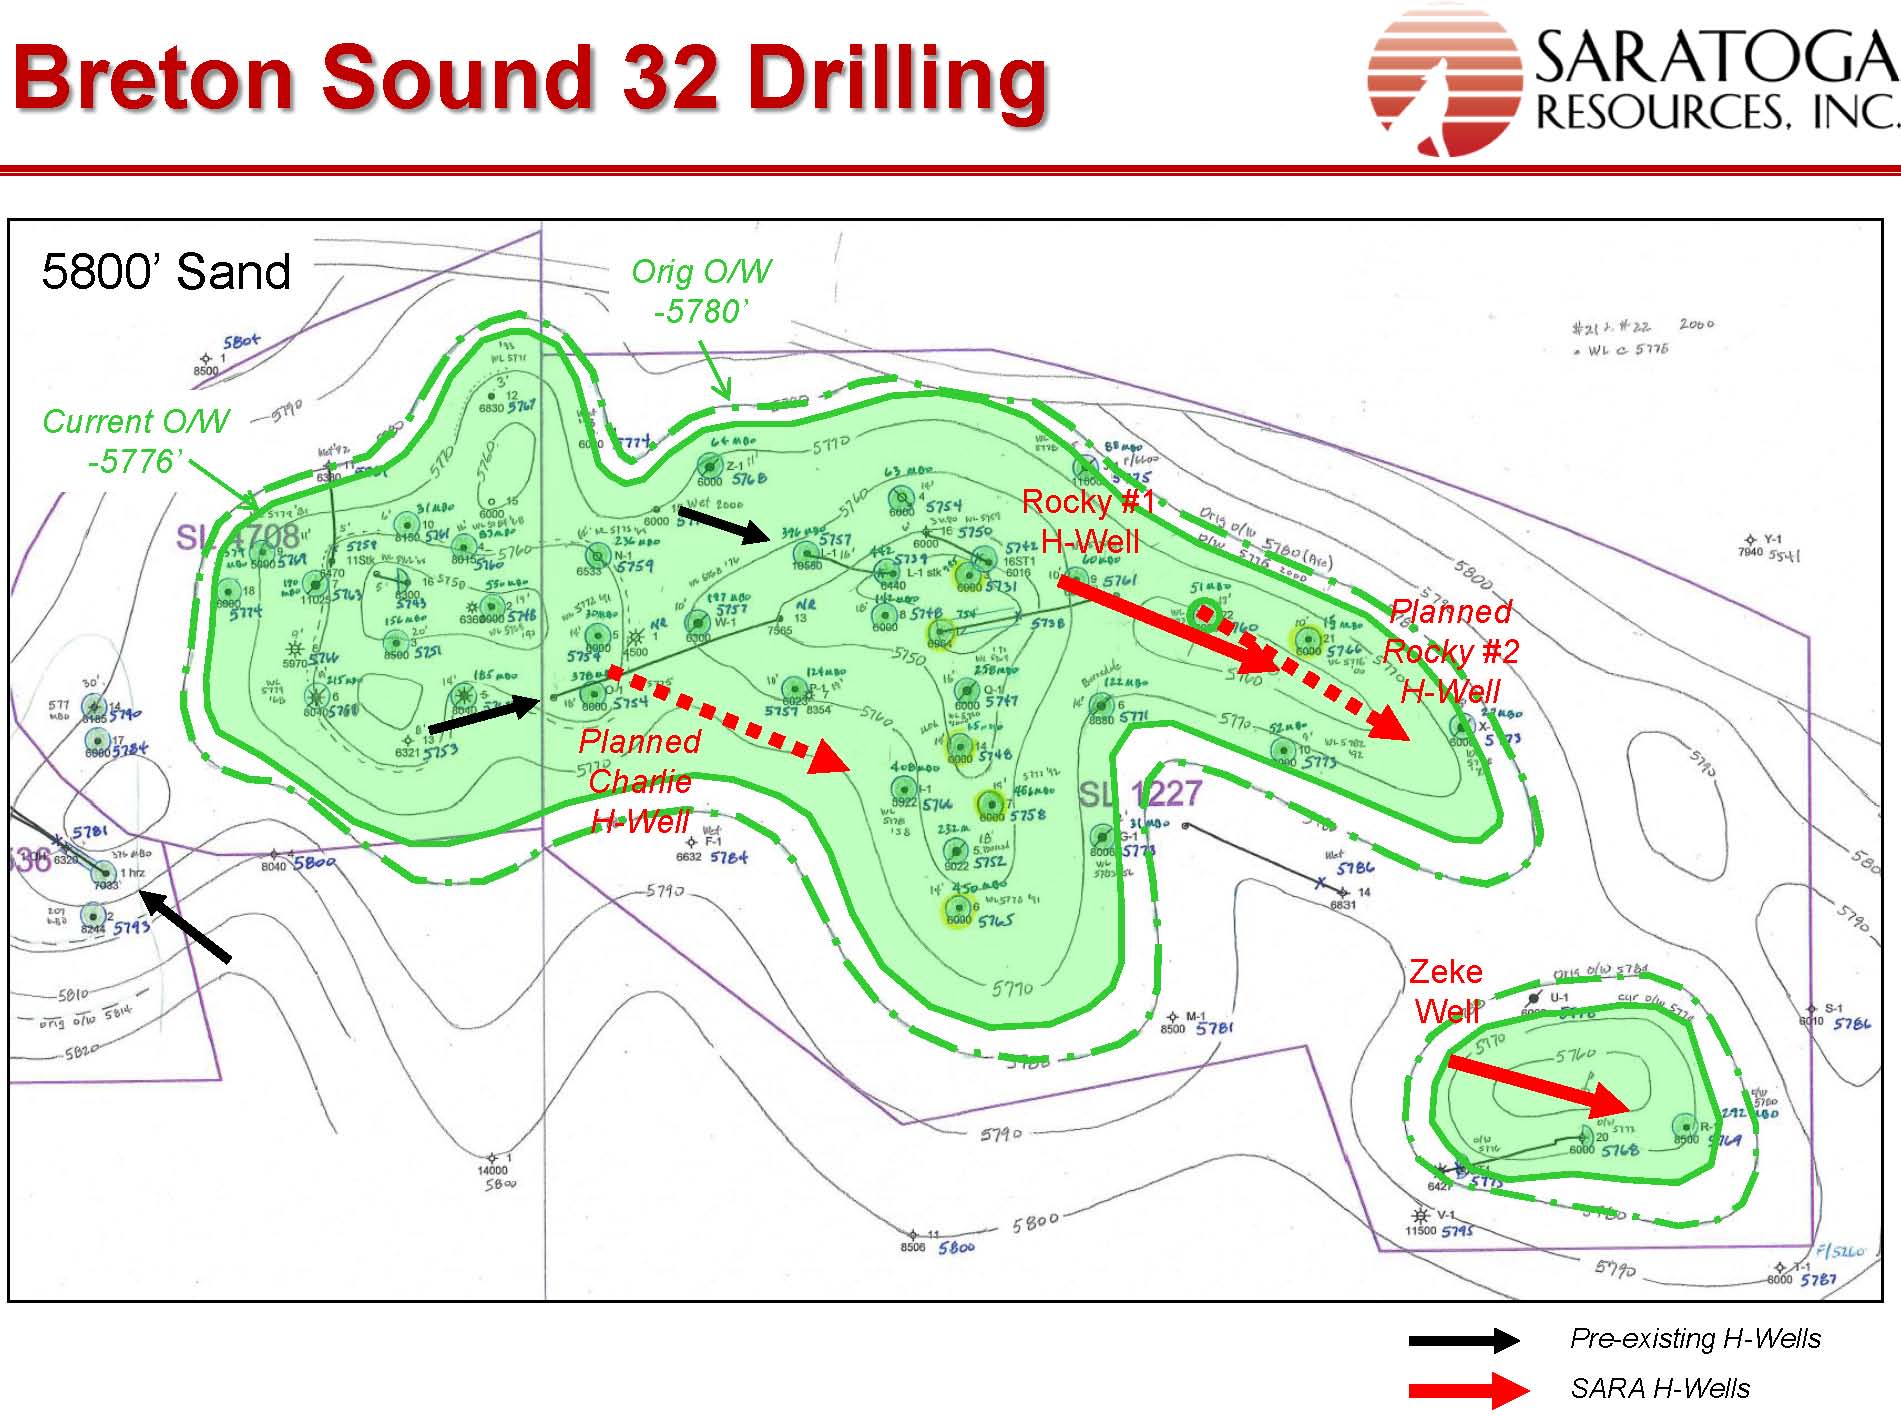 Interview with Saratoga Resources: Hz GOM Well Tests More than 1,500 BOEPD